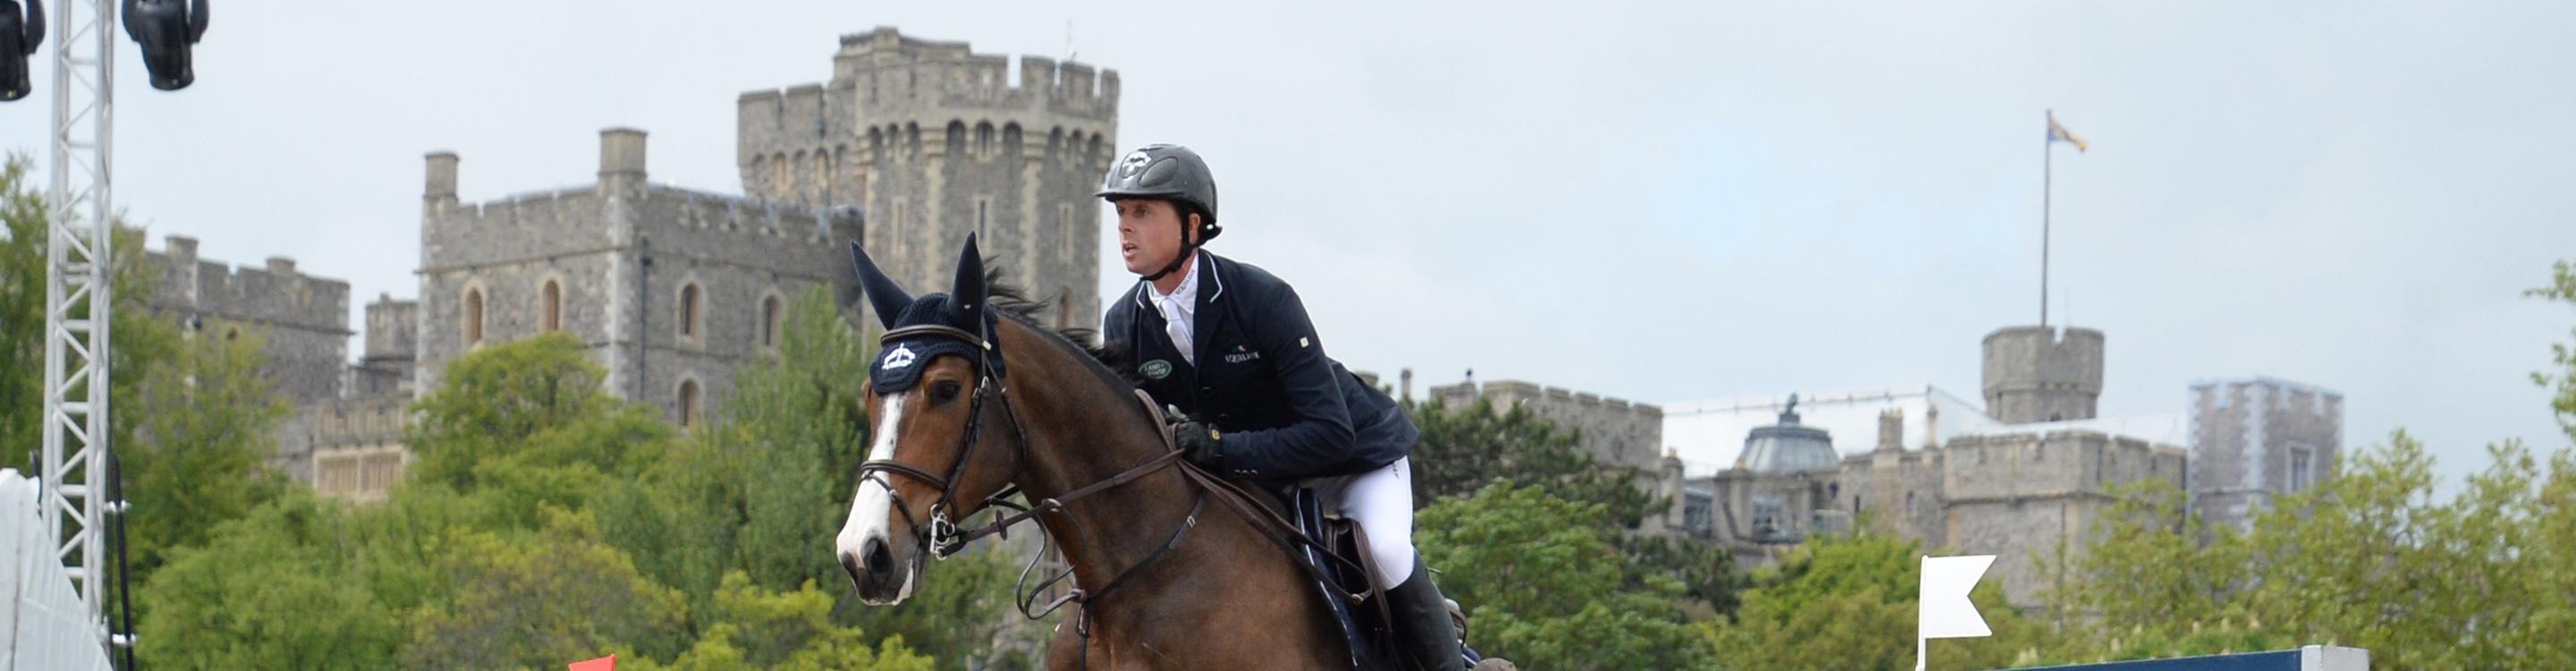 The Royal Windsor Horse Show competition